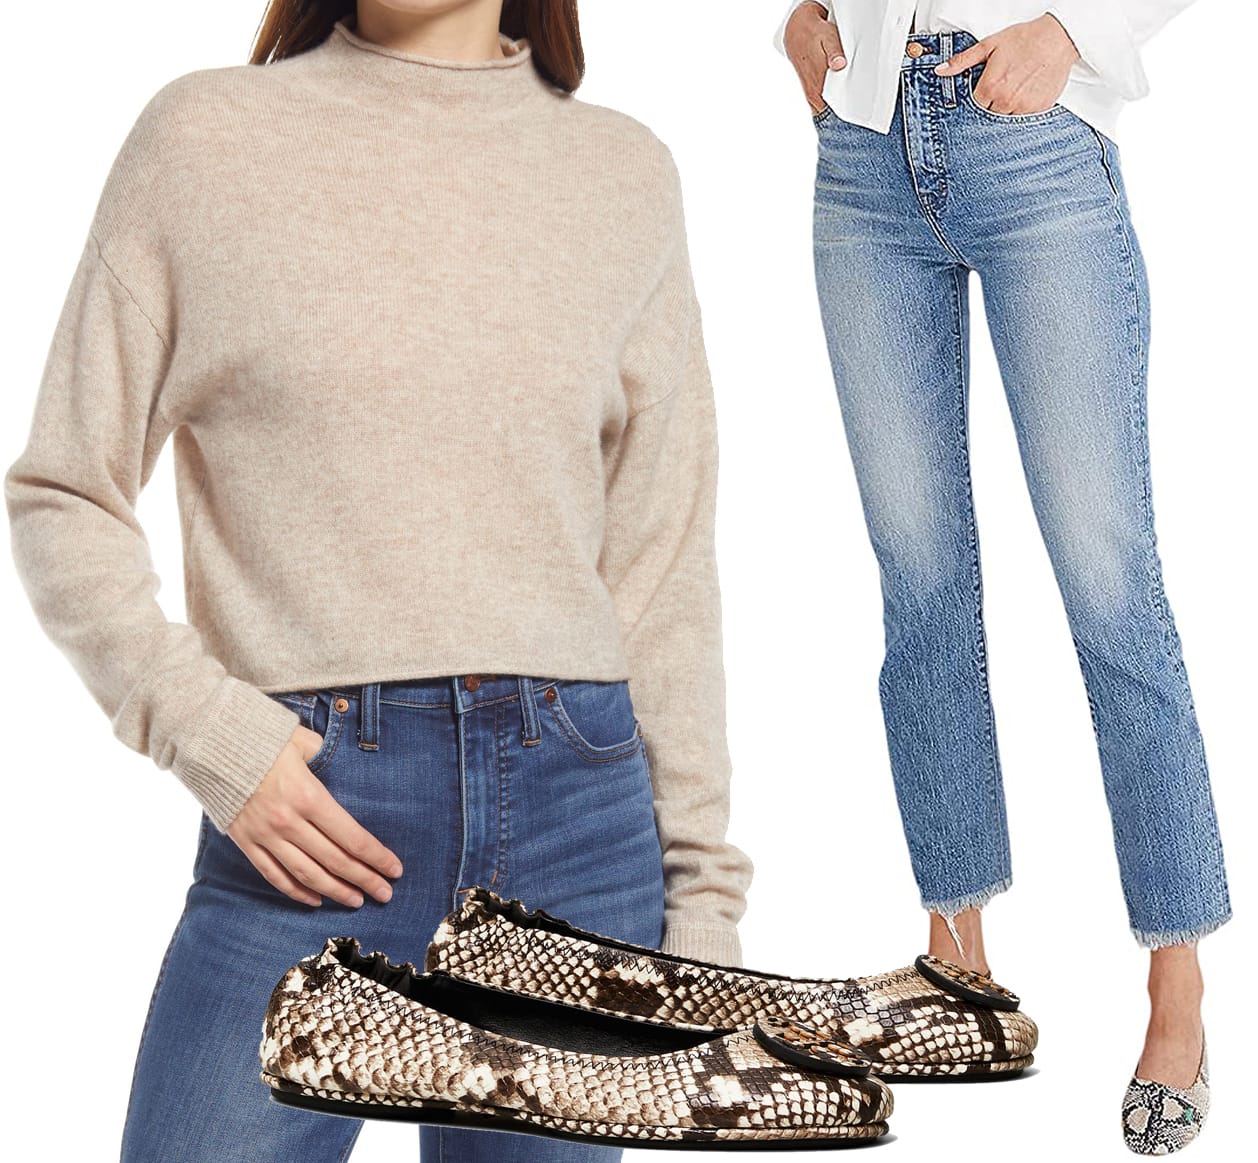 Reformation Cashmere & Wool Crop Roll Sweater, Tory Burch Minnie Travel Ballet, Madewell The Perfect Vintage Jean in Ainsworth Wash